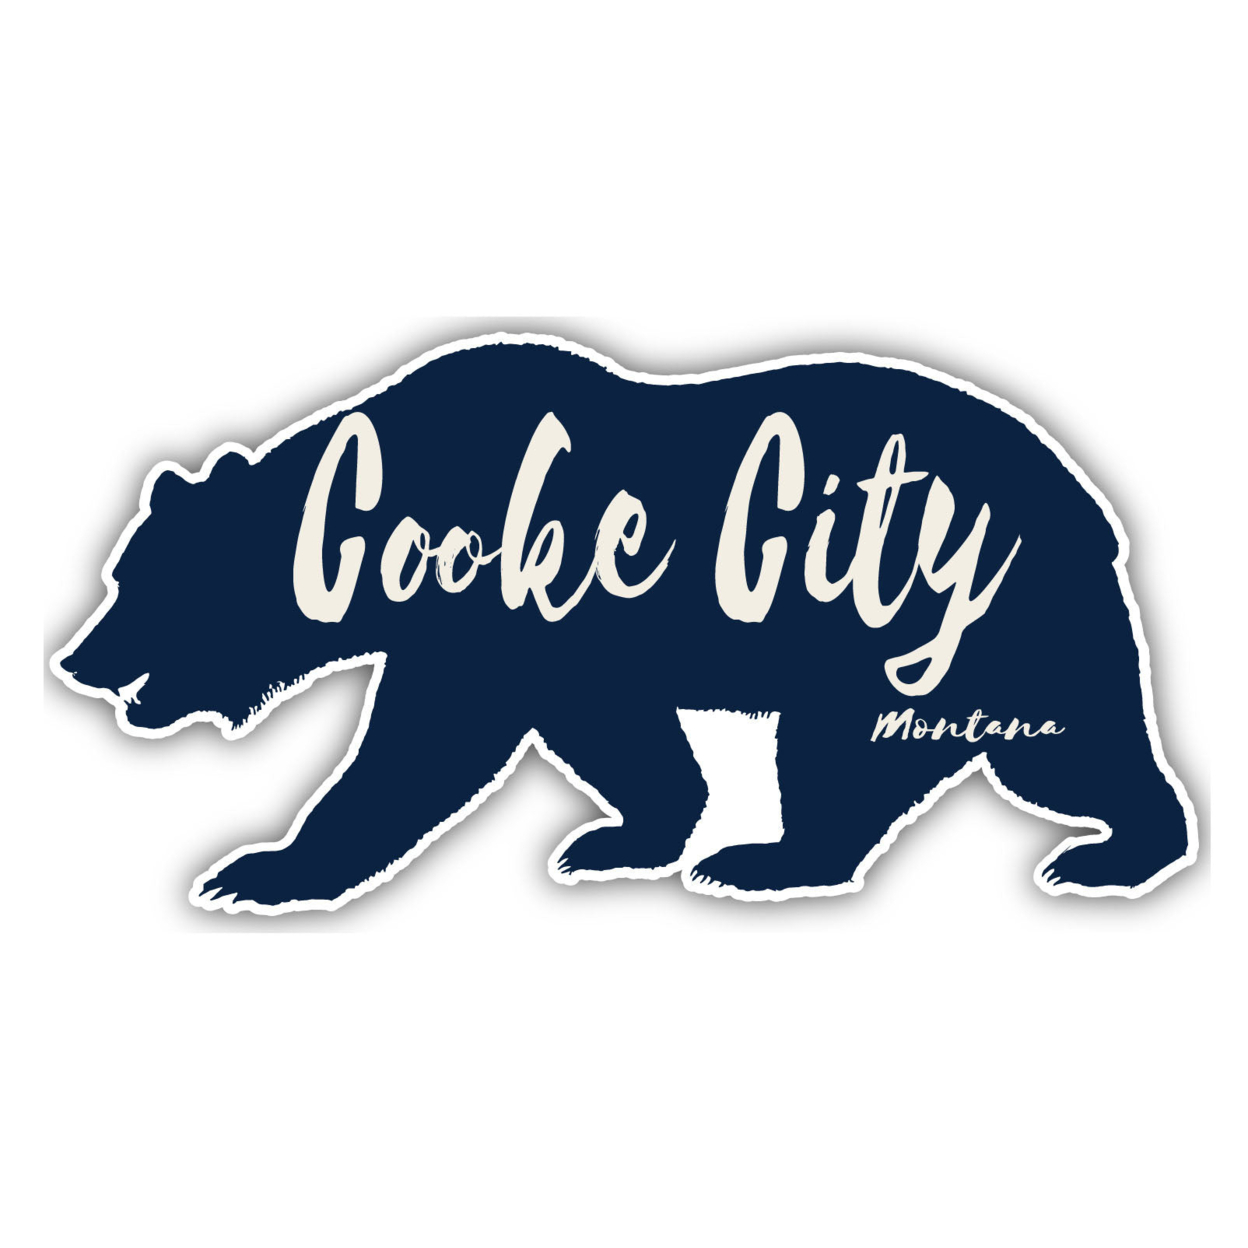 Cooke City Montana Souvenir Decorative Stickers (Choose Theme And Size) - 4-Pack, 8-Inch, Great Outdoors